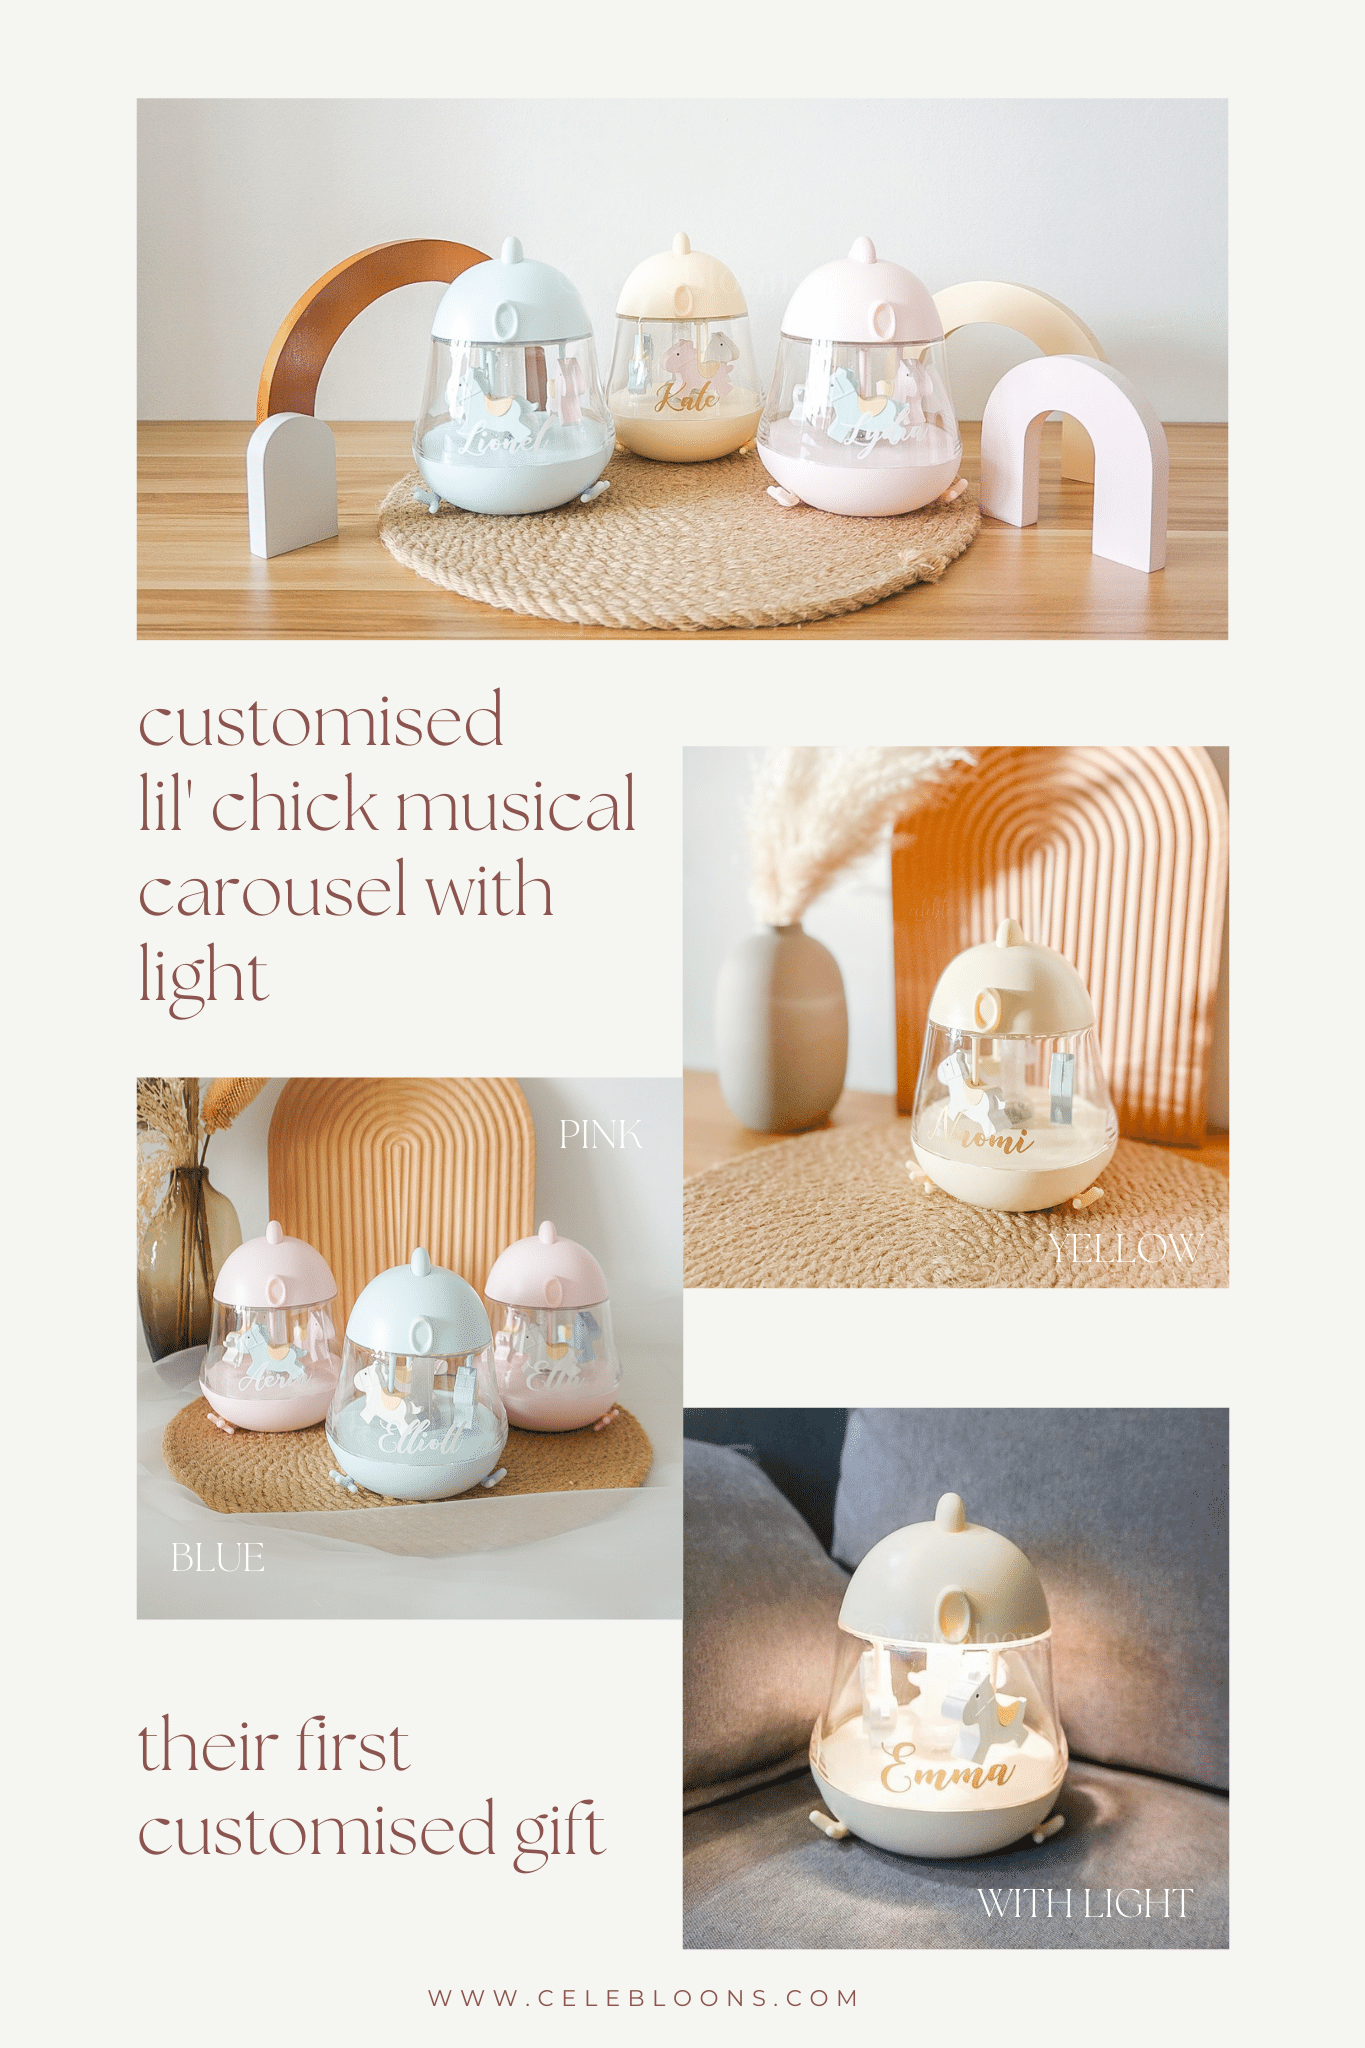  Customised  Lil Chick Carousel with light